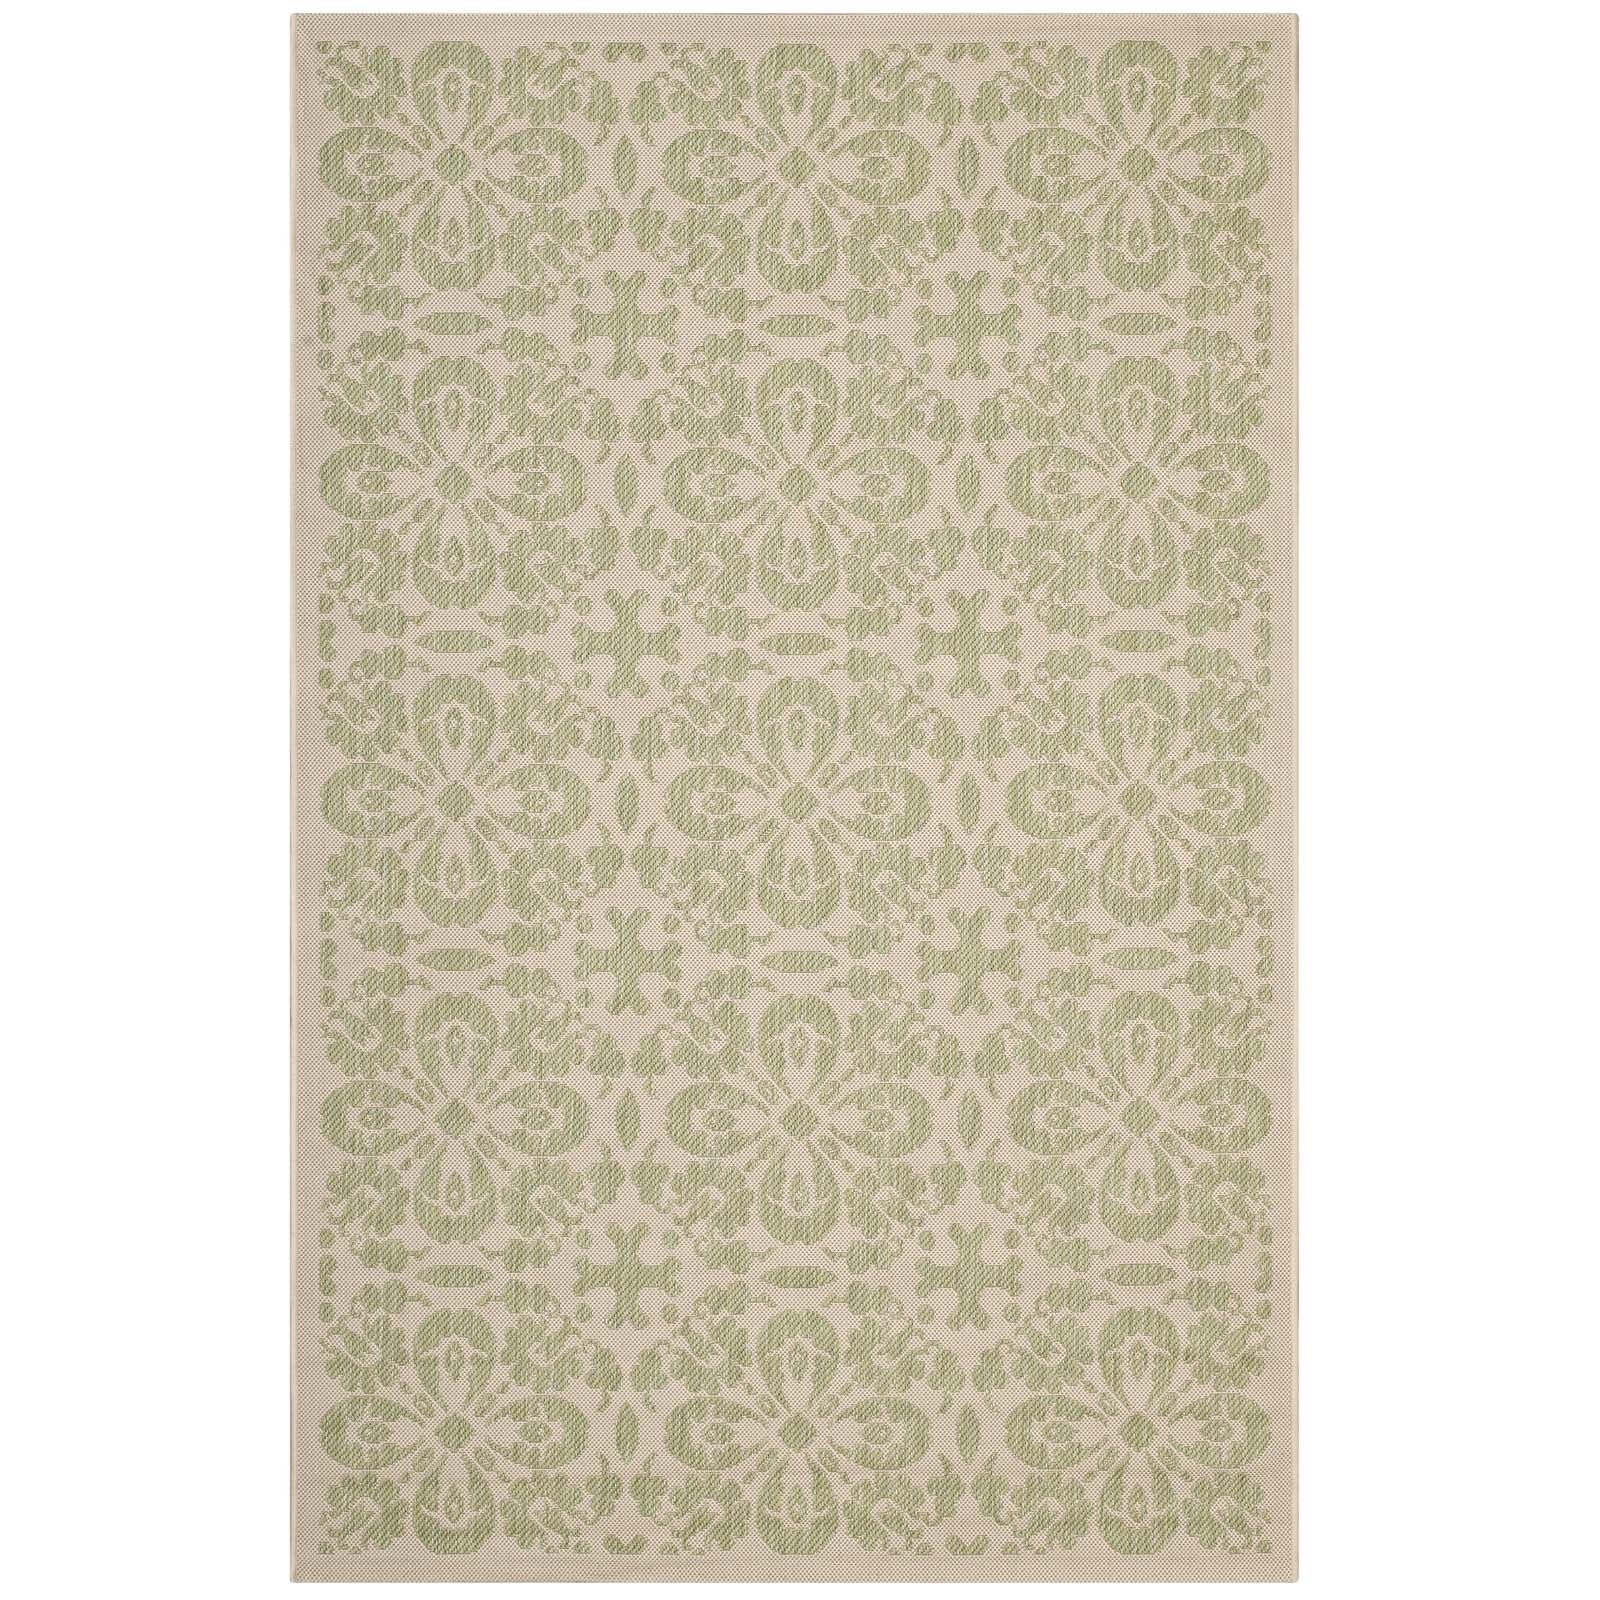 Light Green and Beige / 8x10